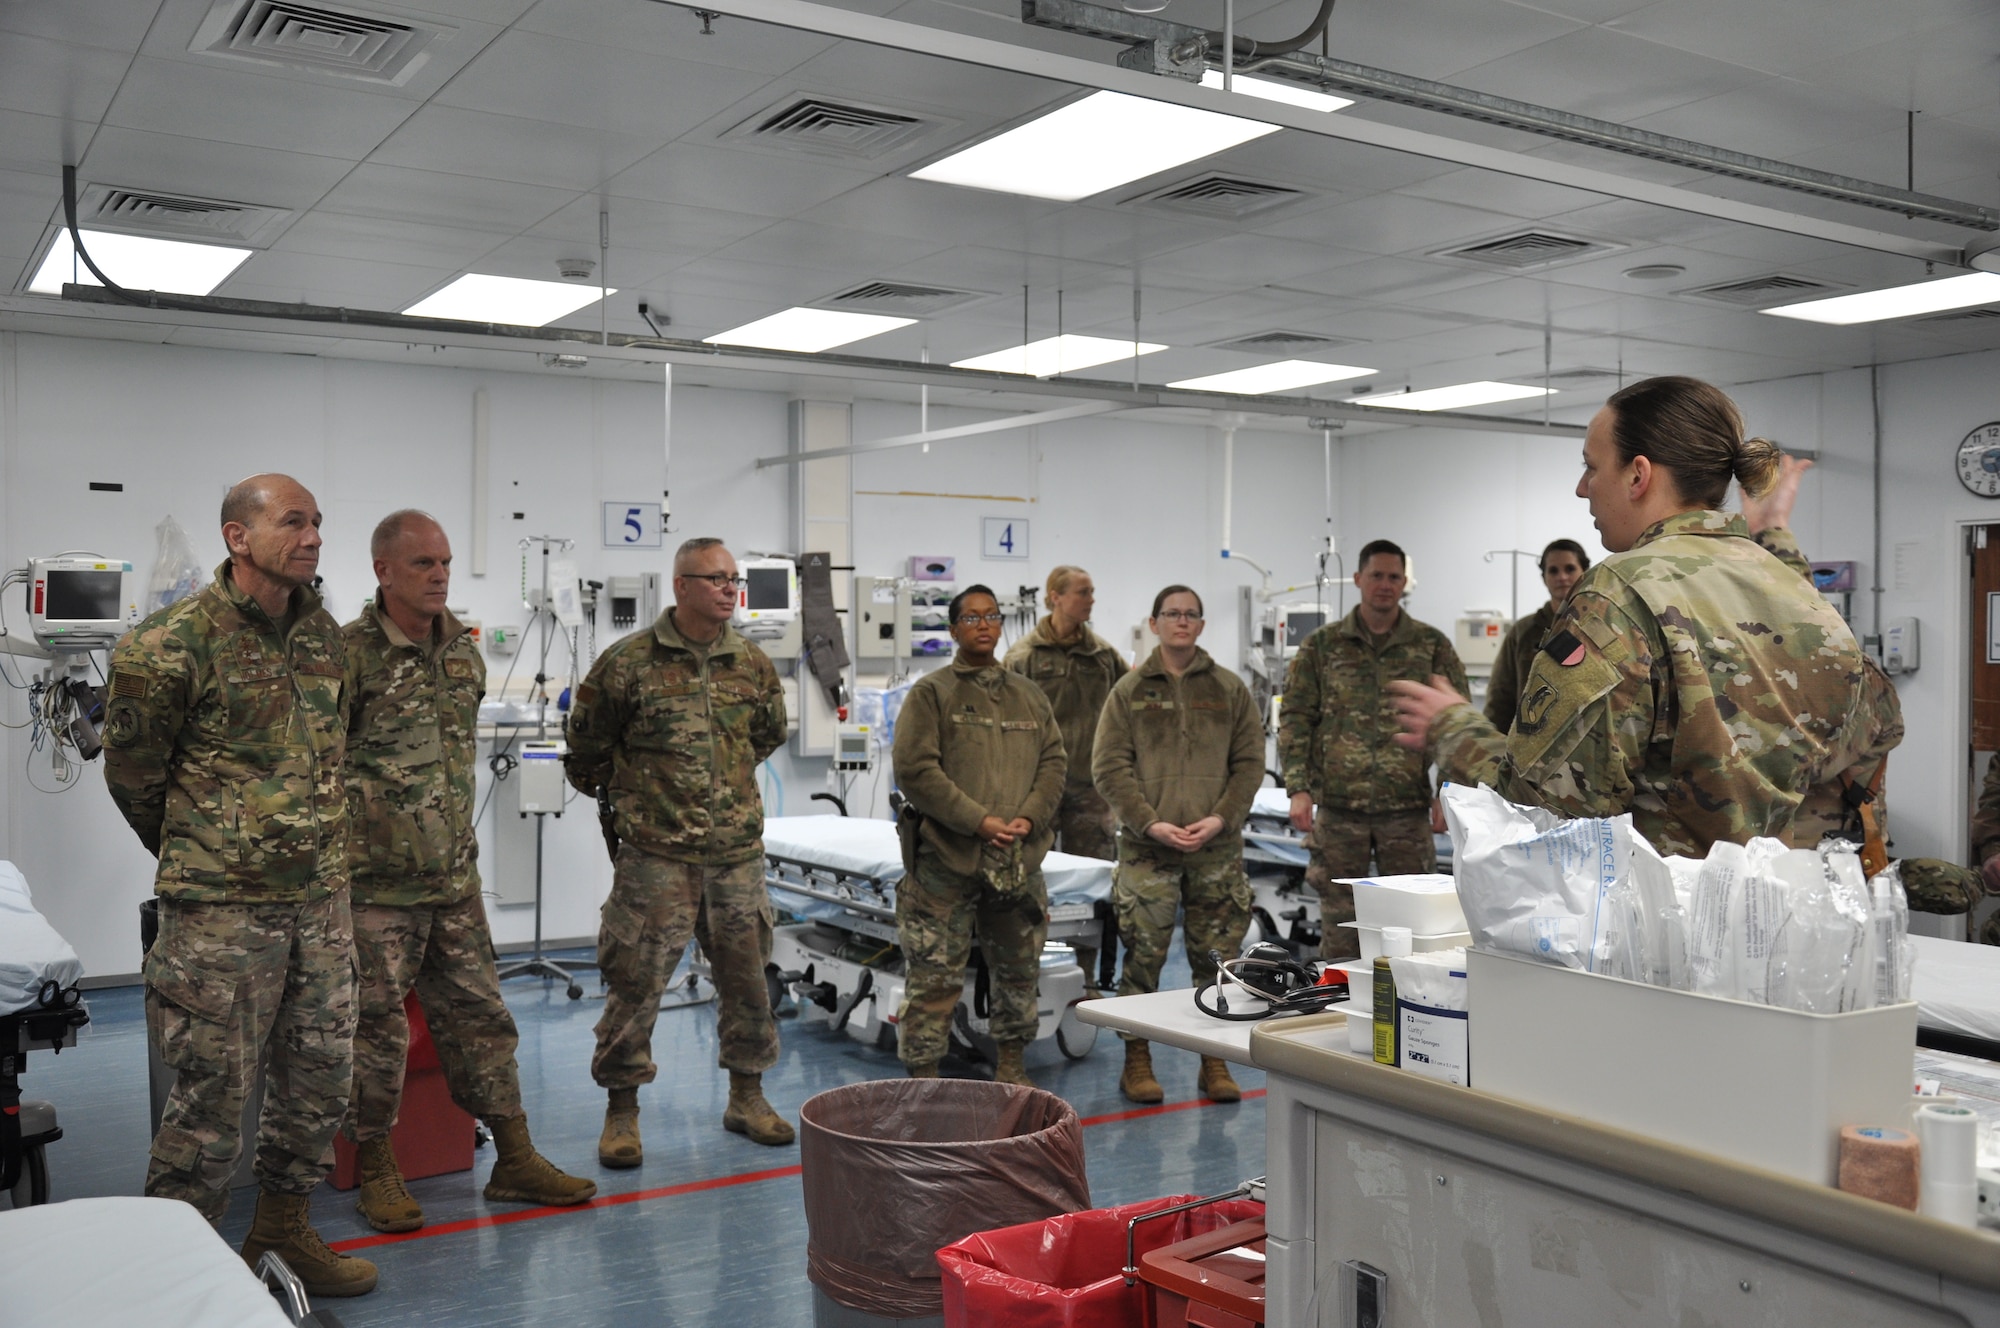 Airmen from the 455th Expeditionary Medical Group brief Gen. Mike Holmes, commander of Air Combat Command, and Chief Master Sgt. Frank H. Batten III, ACC command chief master sergeant, about patient care at Bagram Airfield, Afghanistan, Feb. 13, 2019.